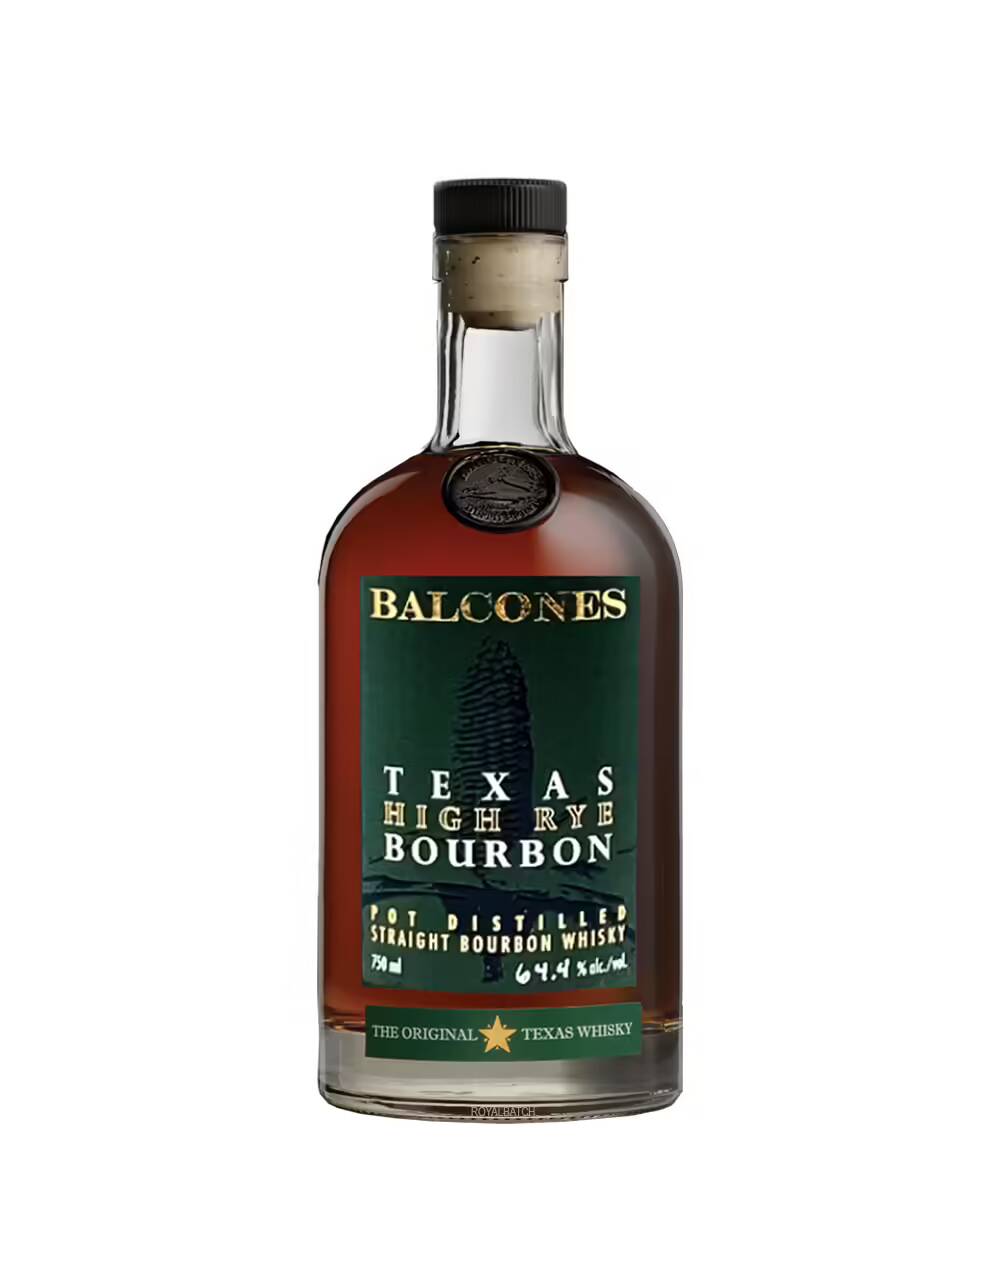 Balcones Texas High Rye Bourbon Limited Edition Whisky